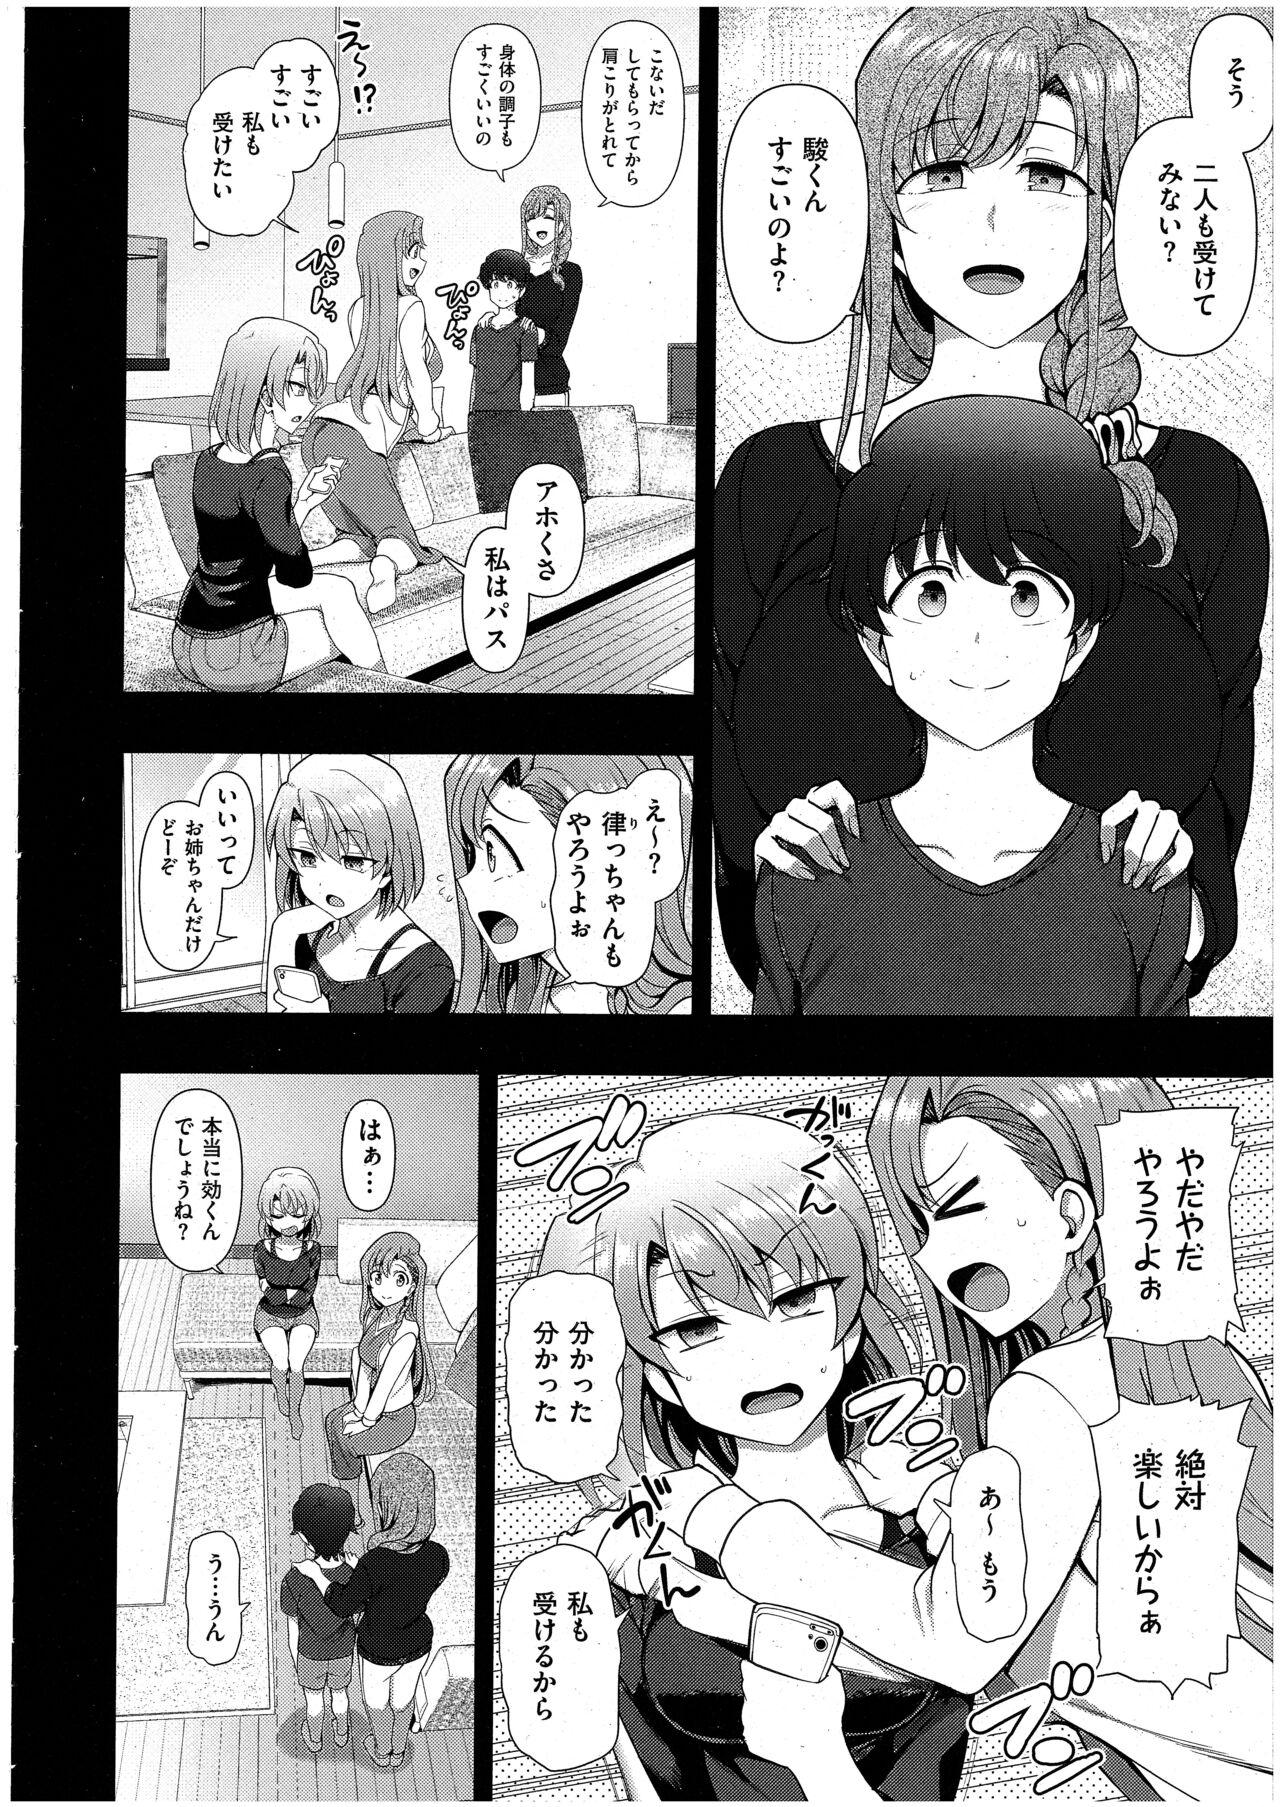 Tgirl FamiCon - Family Control Ch. 3 Stepbrother - Page 10